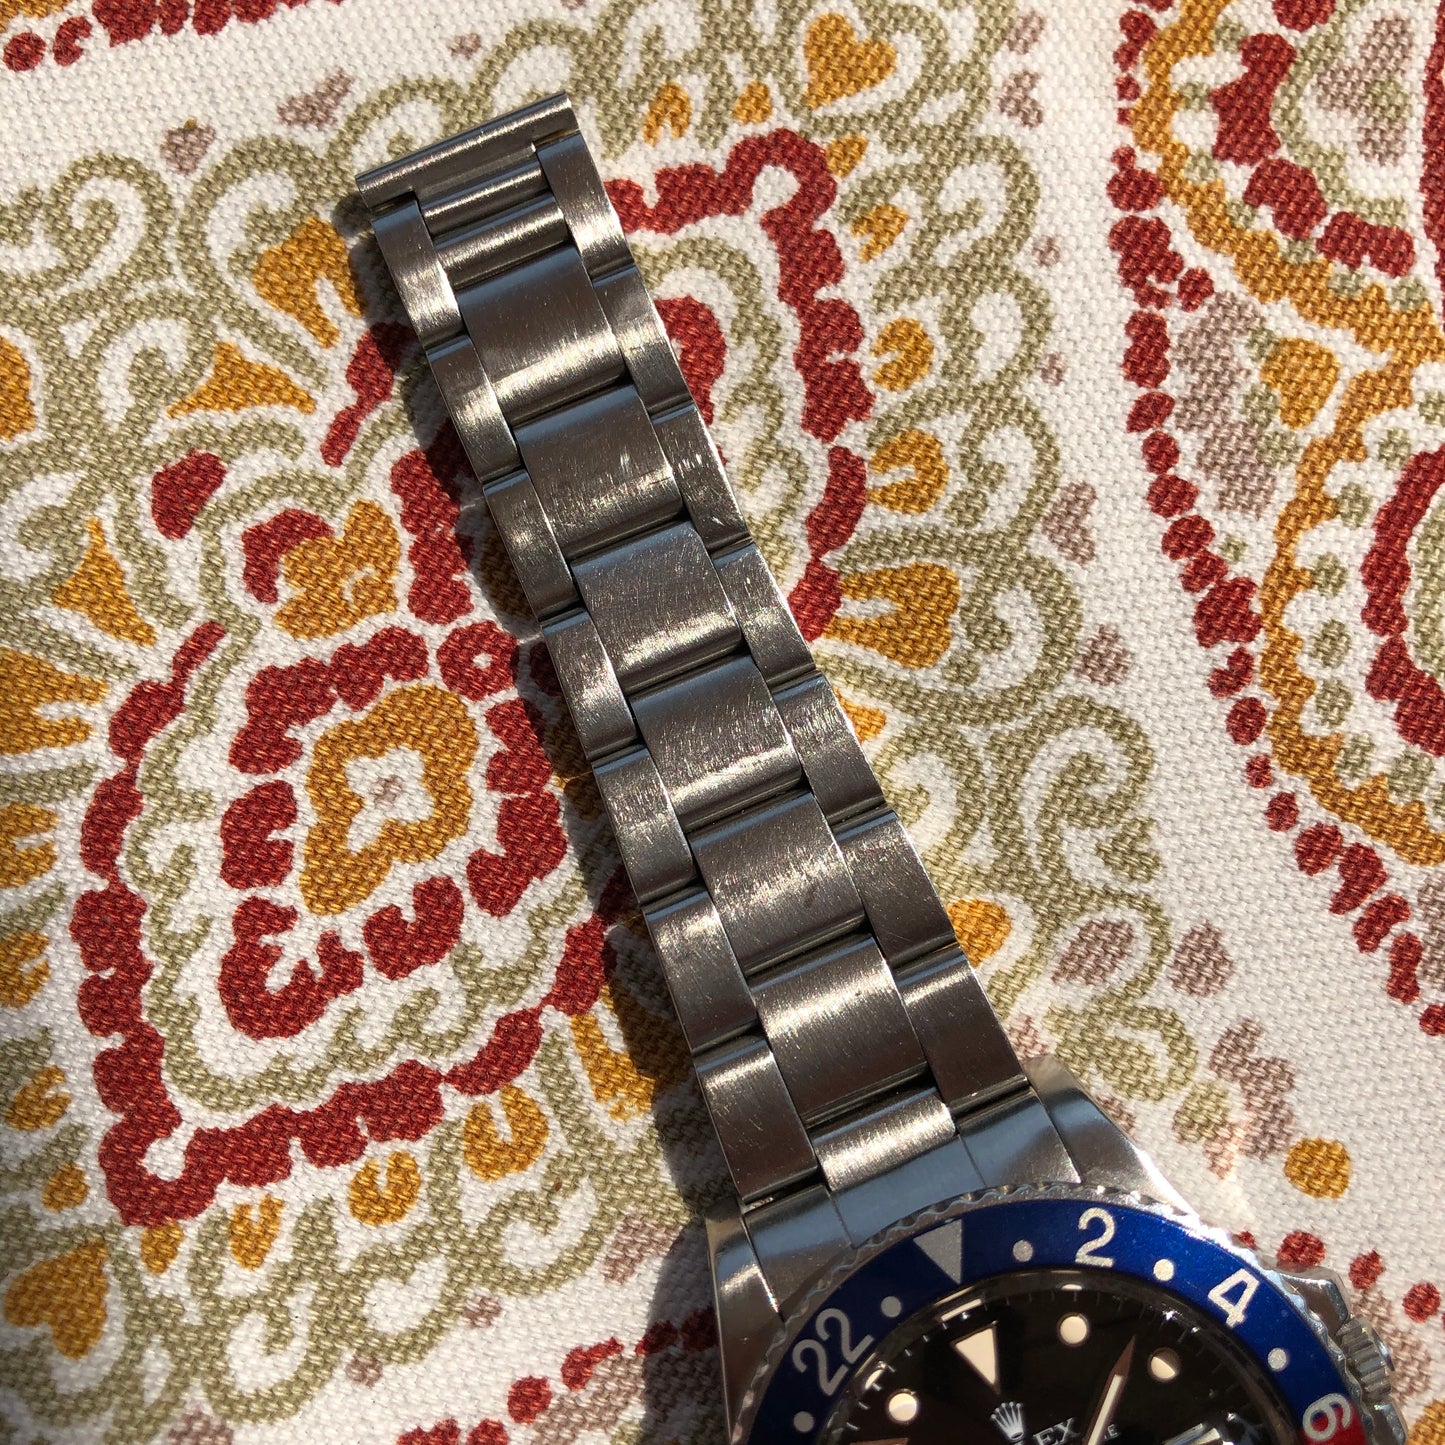 1984 Vintage Rolex GMT MASTER 16750 Pepsi US AIR FORCE Wristwatch - Hashtag Watch Company